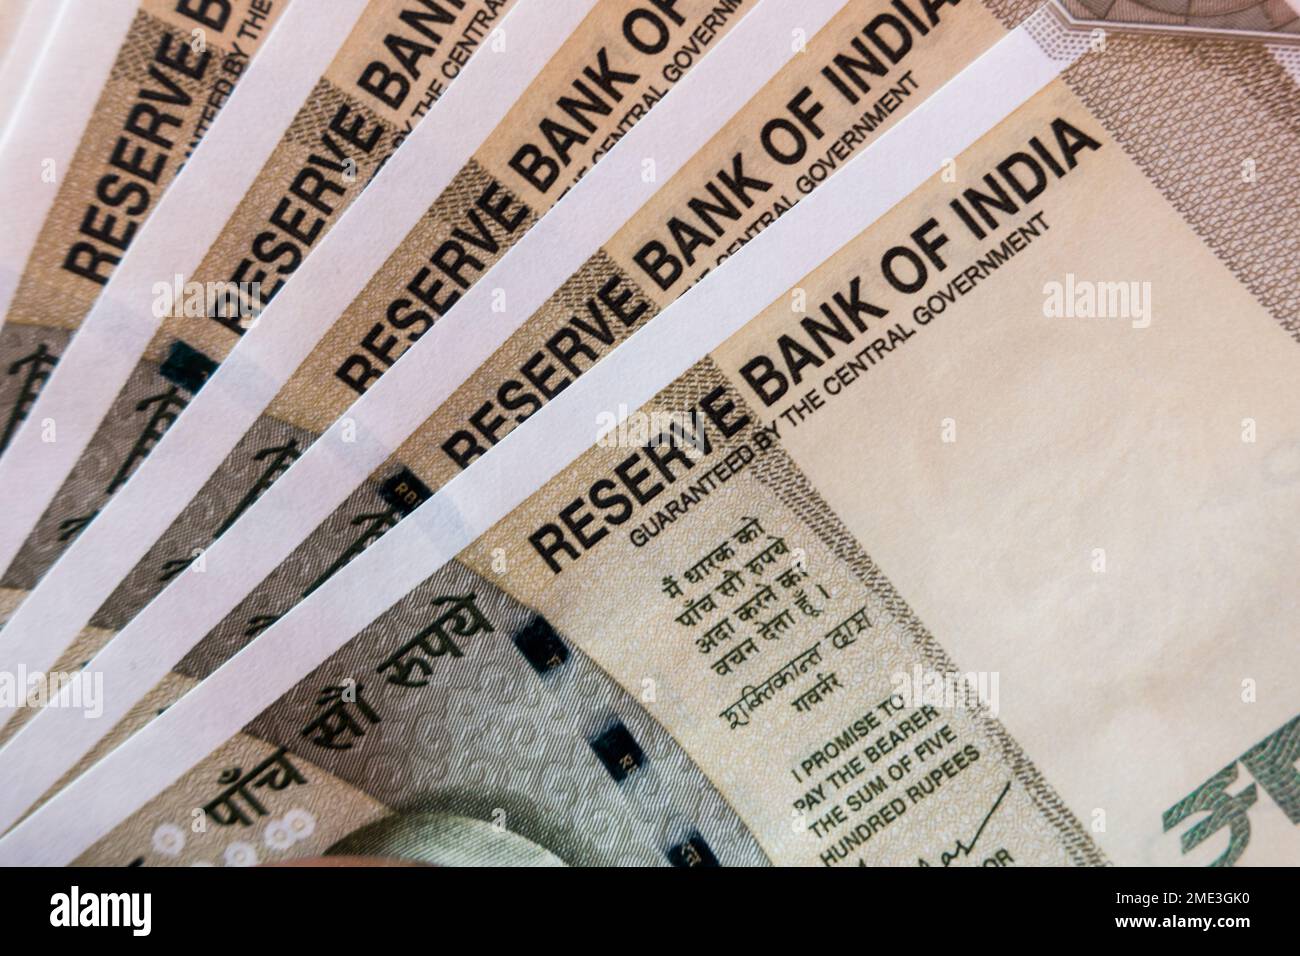 Reserve Bank of India printed currency notes close up Stock Photo